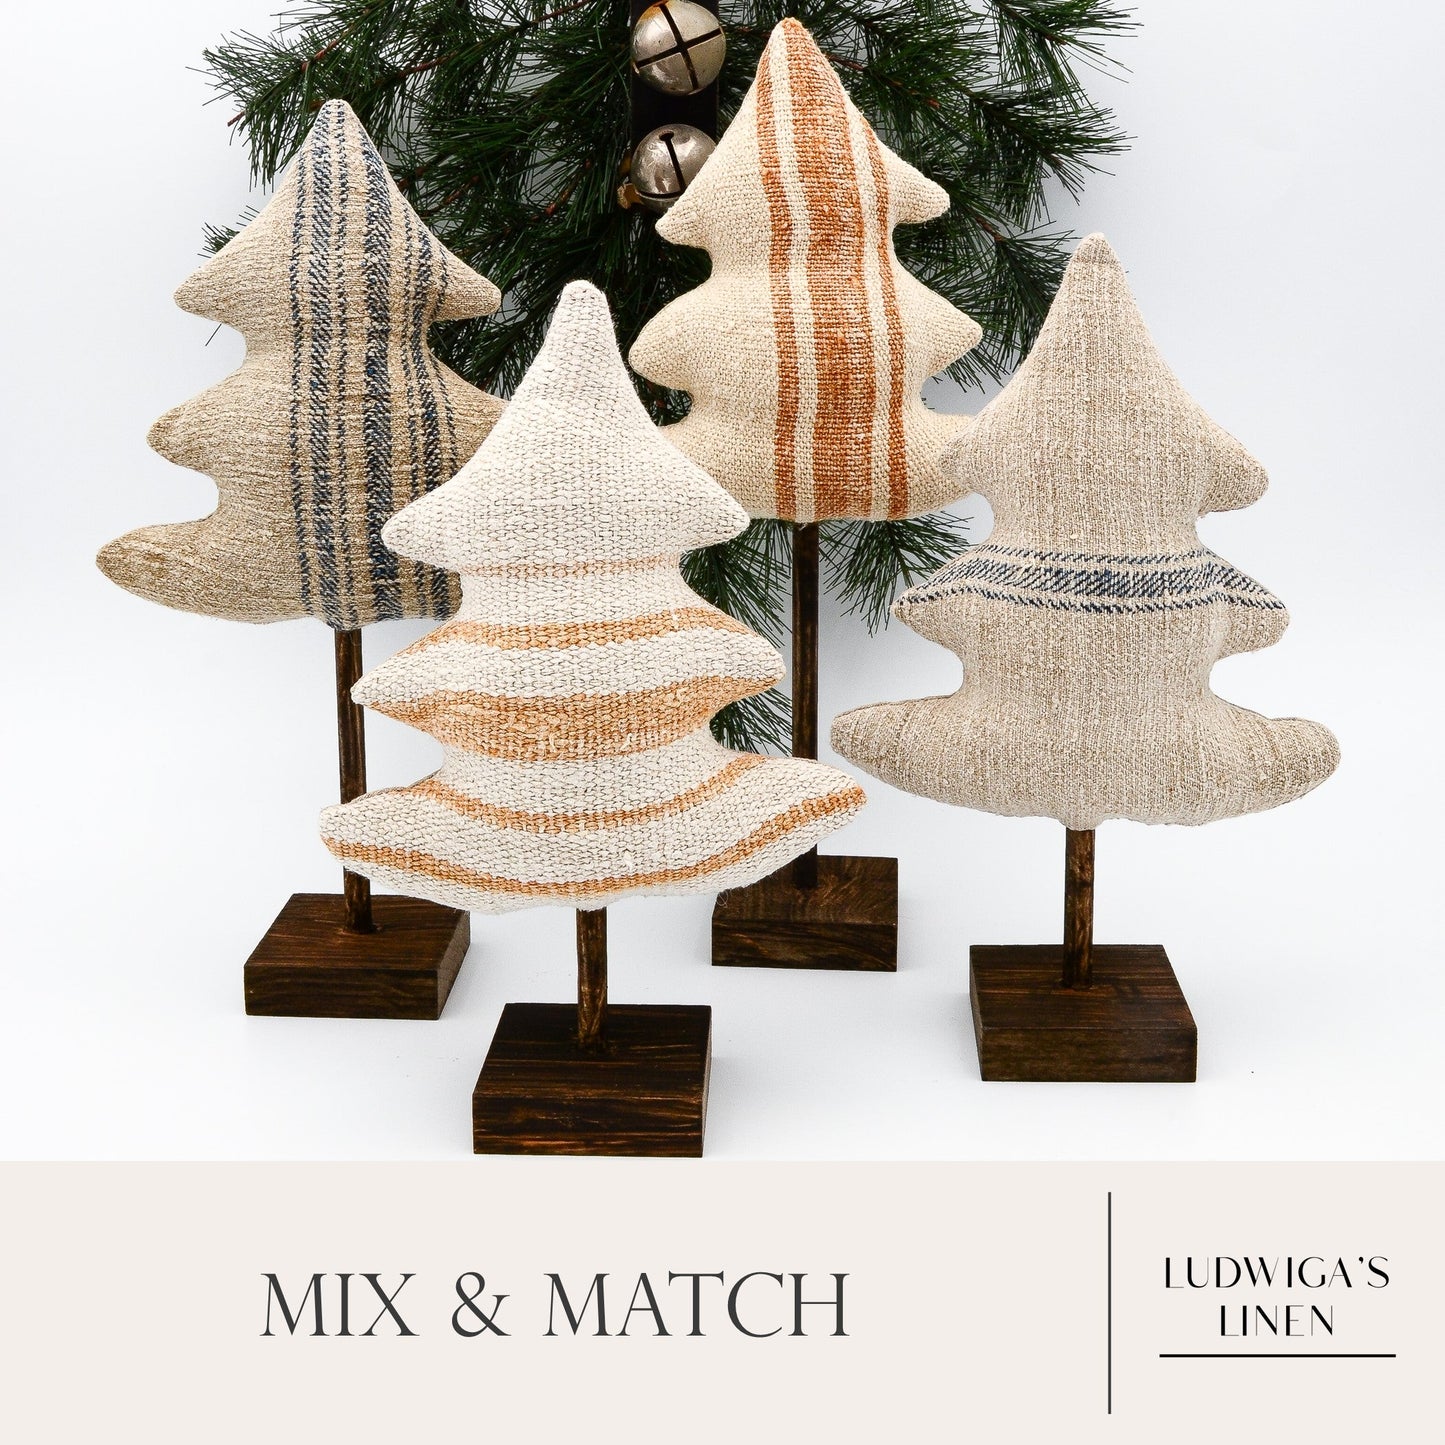 Christmas/holiday ornaments - mix and match European grain sack linen trees, each on a dark brown stained wooden stand